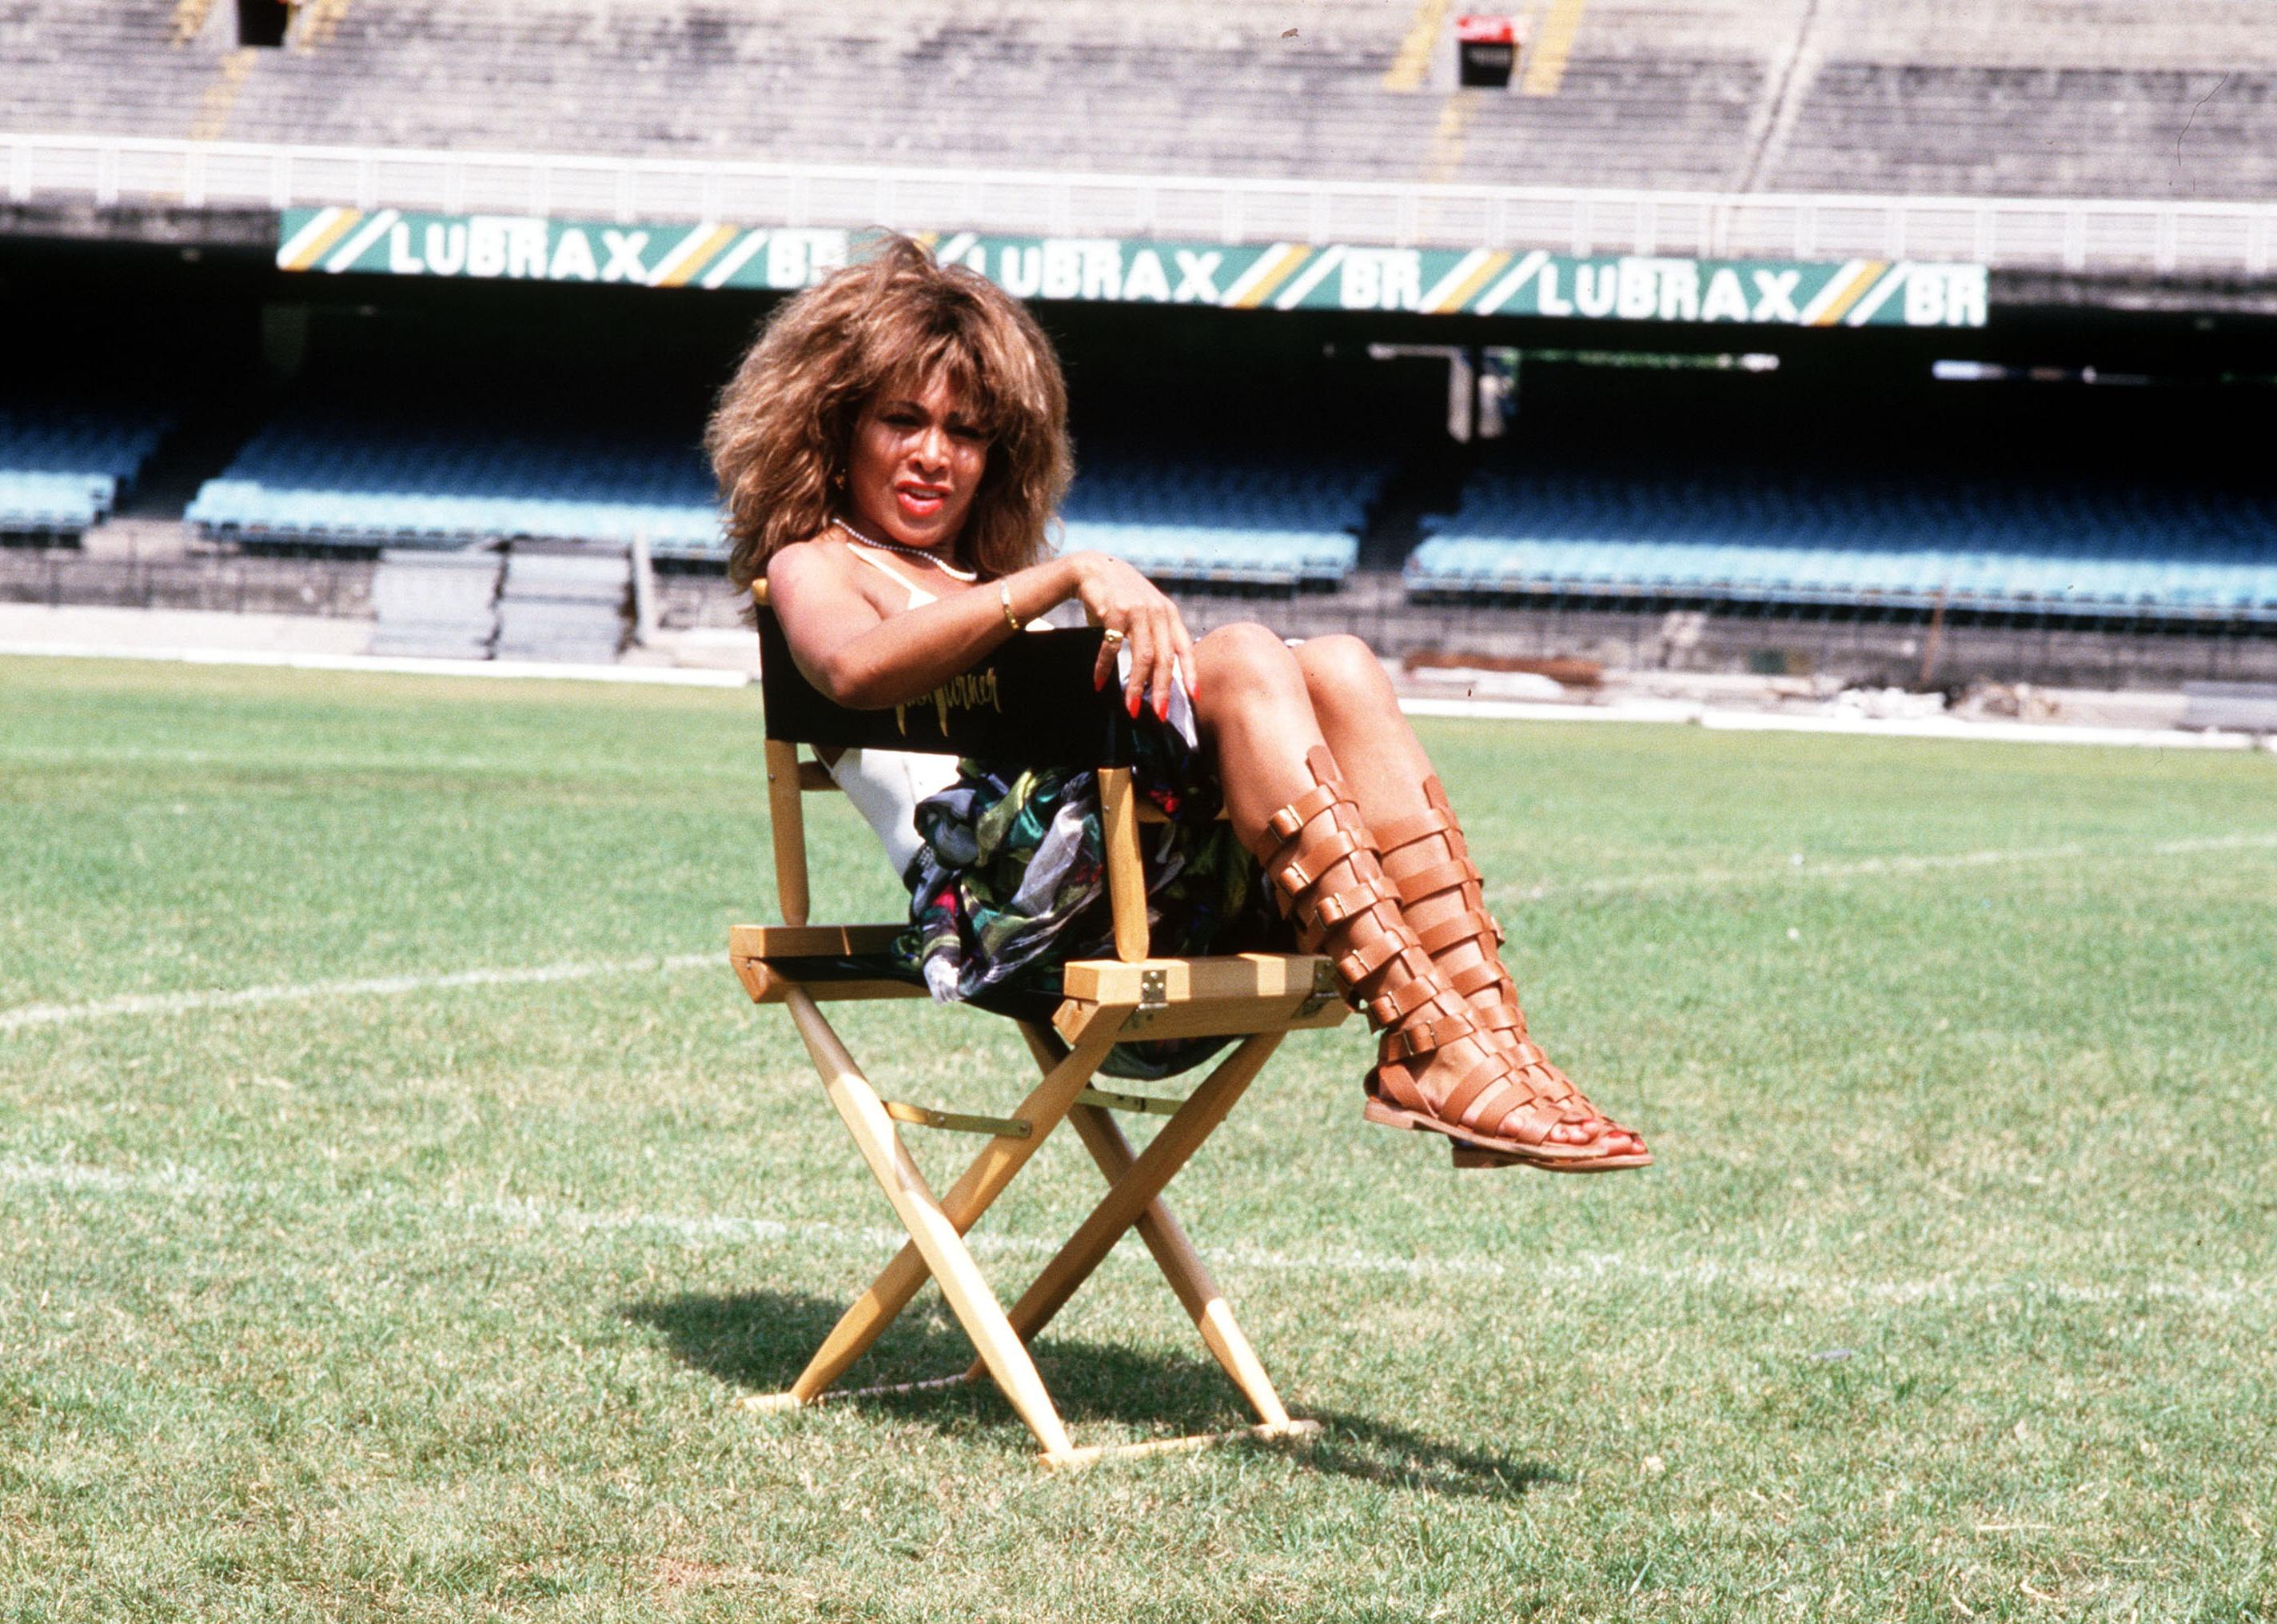 <p>Still in the midst of a miraculous career comeback, superstar Tina Turner embarked on the Break Every Rule world tour between 1987 and 1988. Her performance before a crowd of over 180,000 in Rio de Janeiro didn't necessarily break every rule, but it <a href="https://www.thisisdig.com/feature/tina-turner-guinness-world-record-rio-de-janeiro-1988/">did break a Guinness World Record</a> for the most paying concert-goers to see a single artist.</p>